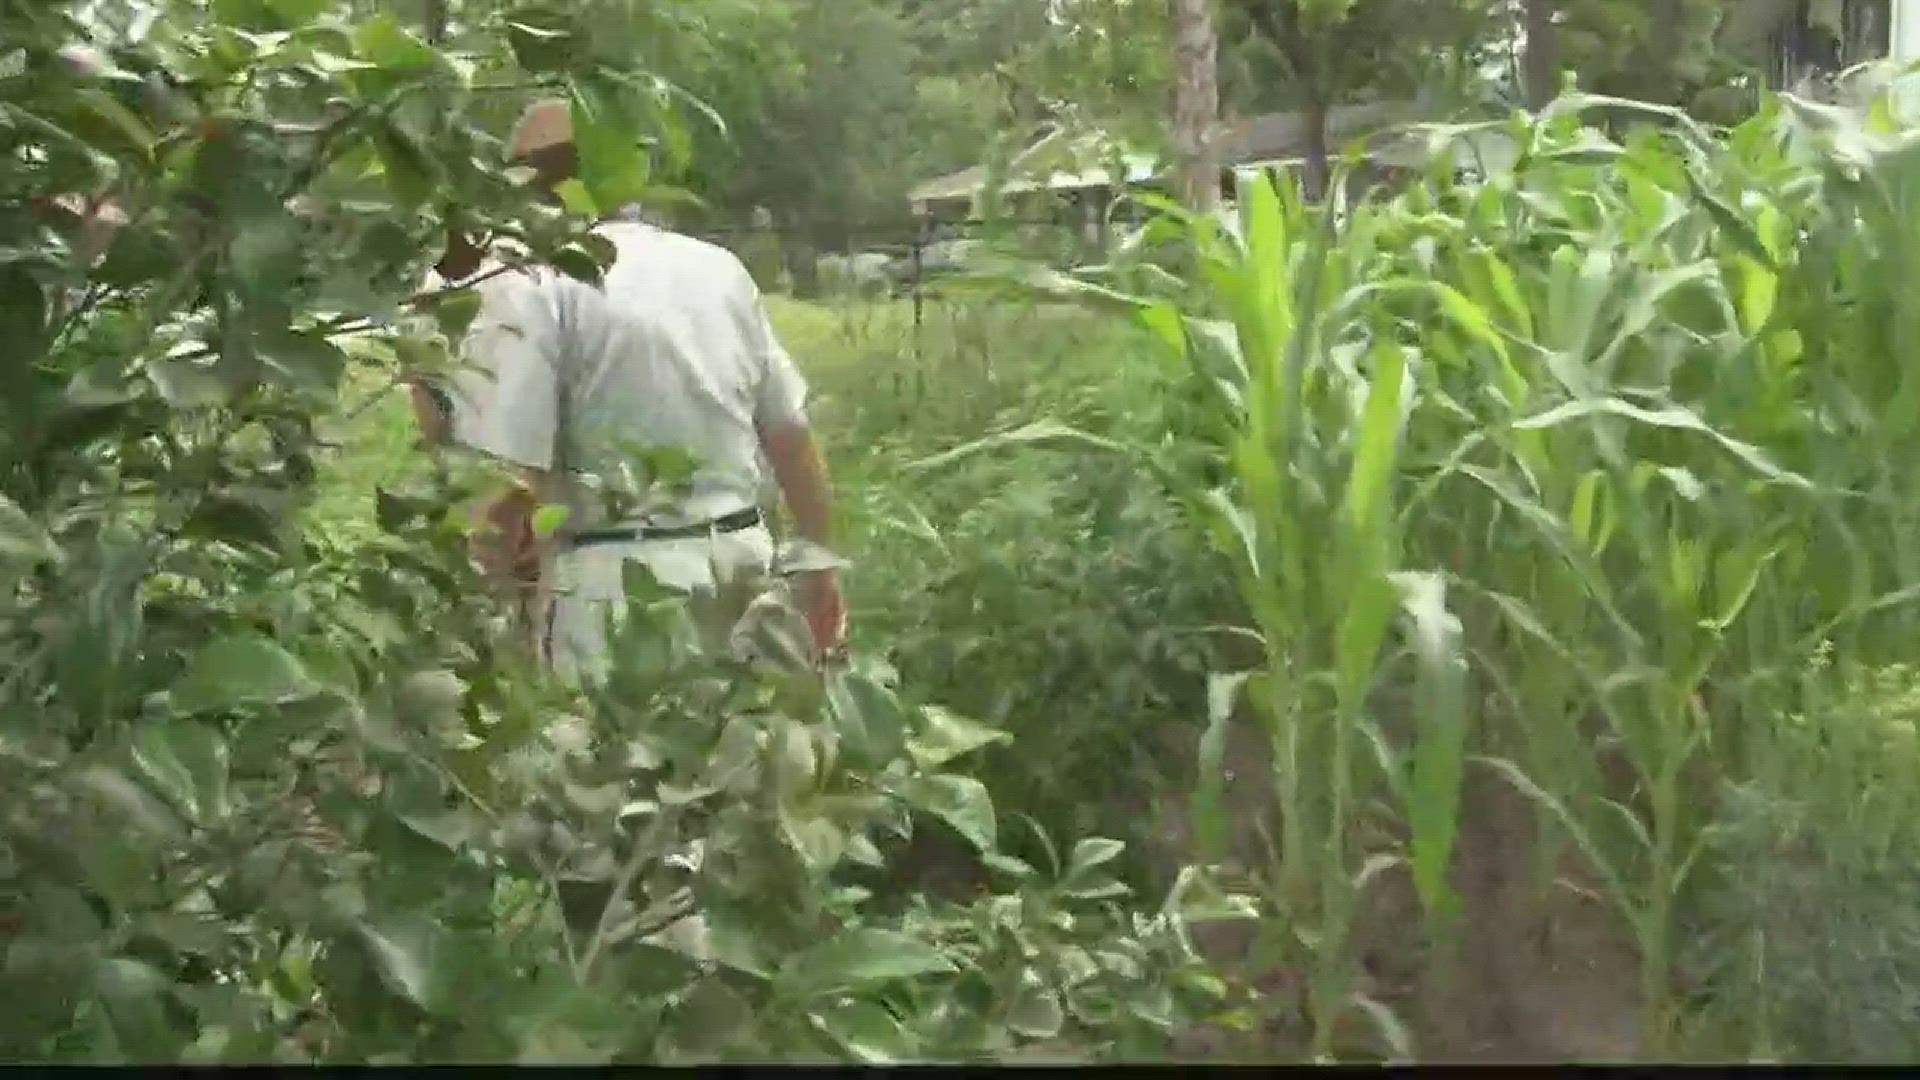 Jim Gandy goes on the road to introduce you to a man and his impressive garden in Columbia.